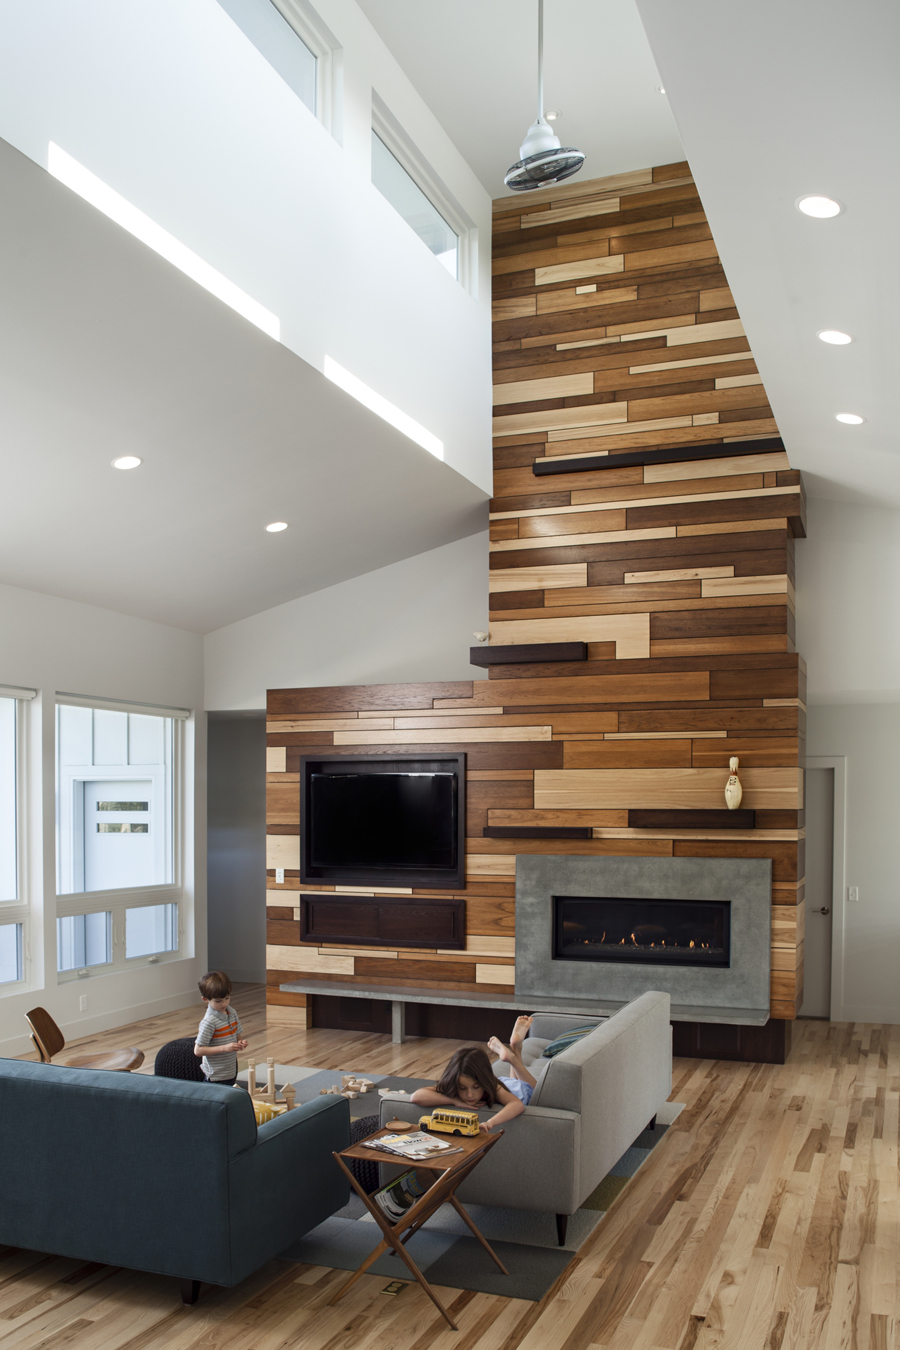 d.KISER design.construct (Omaha, NE) won first place in the Residential Other category in the second annual PureBond® Quality Awards competition for a fireplace/entertainment center design.